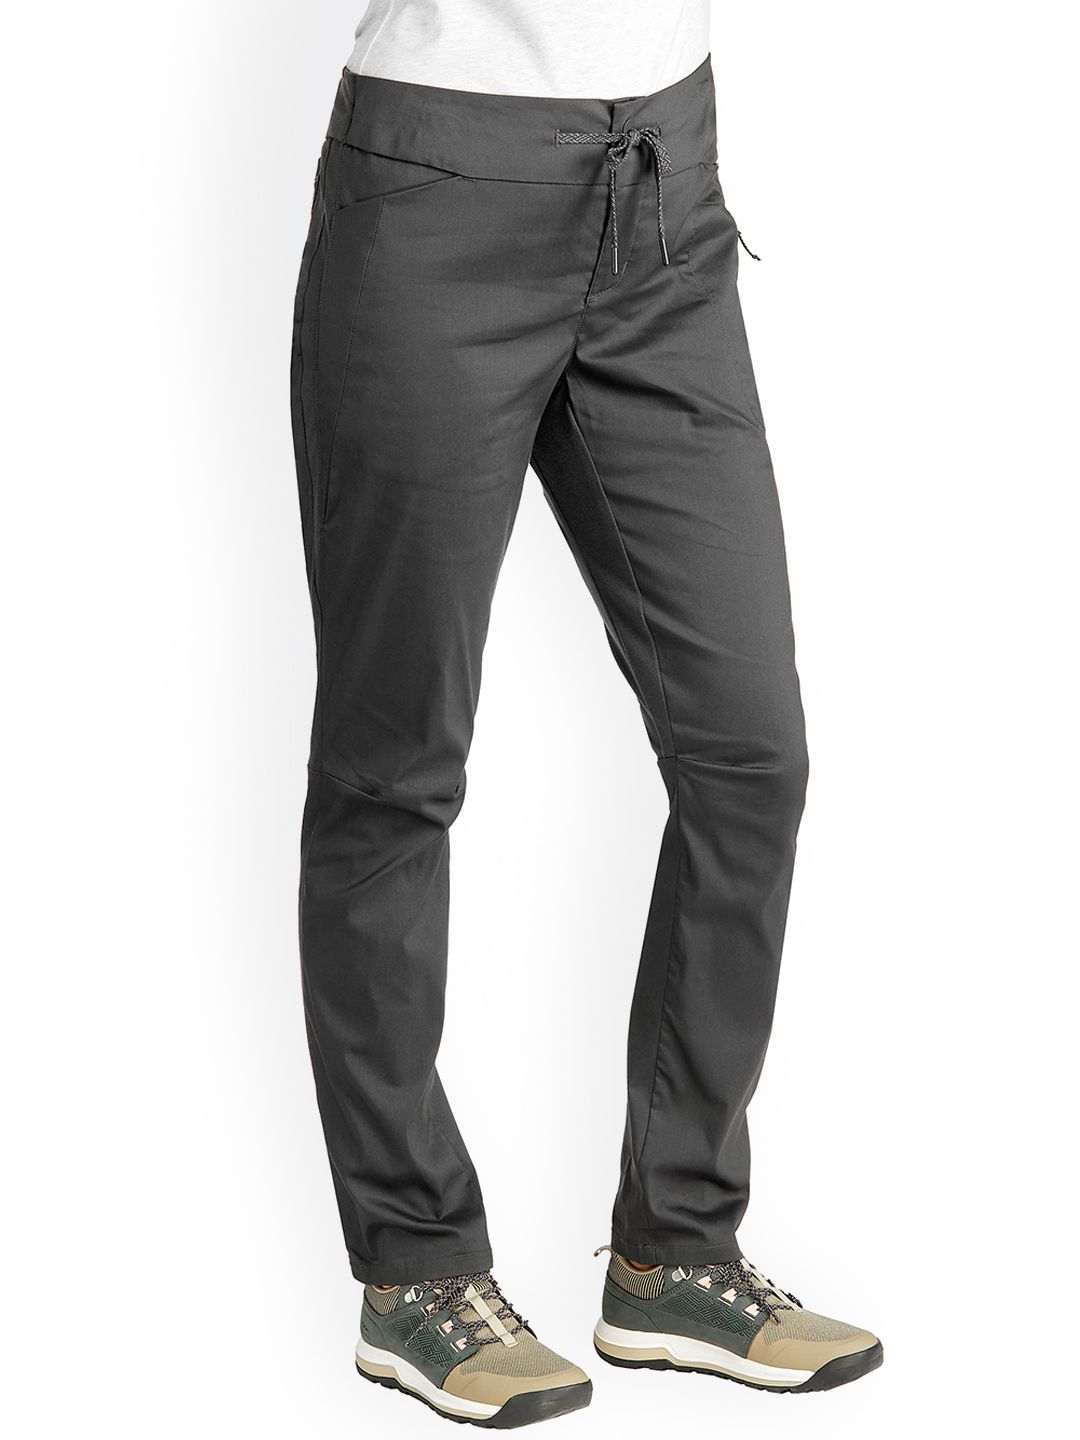 Quechua By Decathlon Women Grey Regular Fit Solid Hiking Trousers Price in India